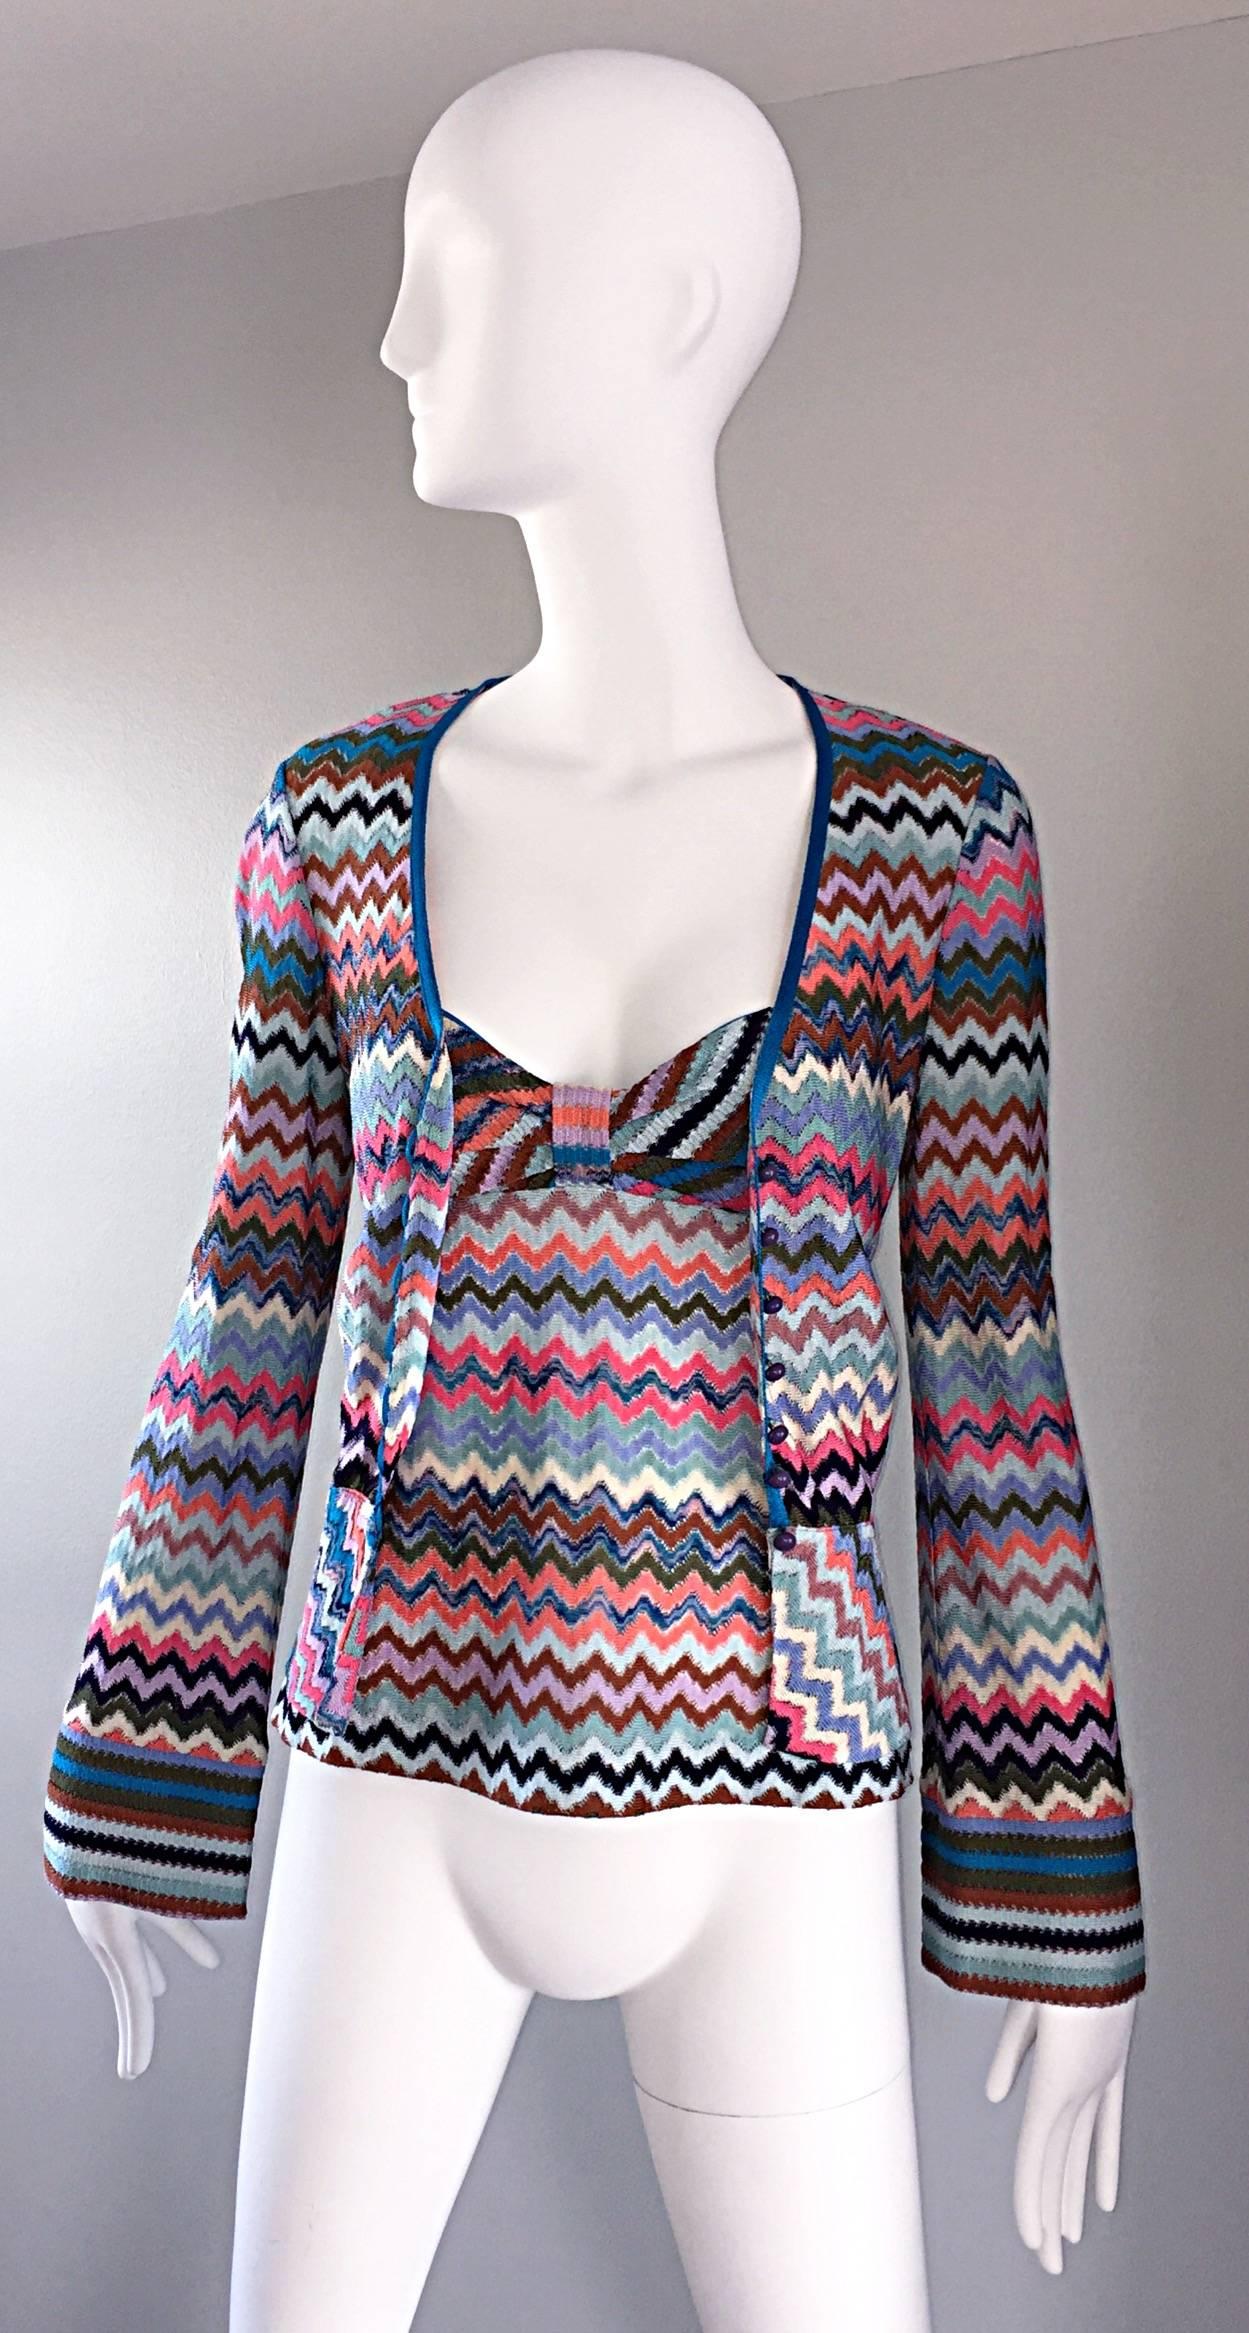 Amazing vintage 1990s MISSONI twinset! Signature cheveron Missoni zig zag in pinks, blues and white. Beautiful round blue lucite buttons up the tailored cardigan. Chic angel bell sleeves. Sexy marching sleeveless top. Bot pieces great together or as